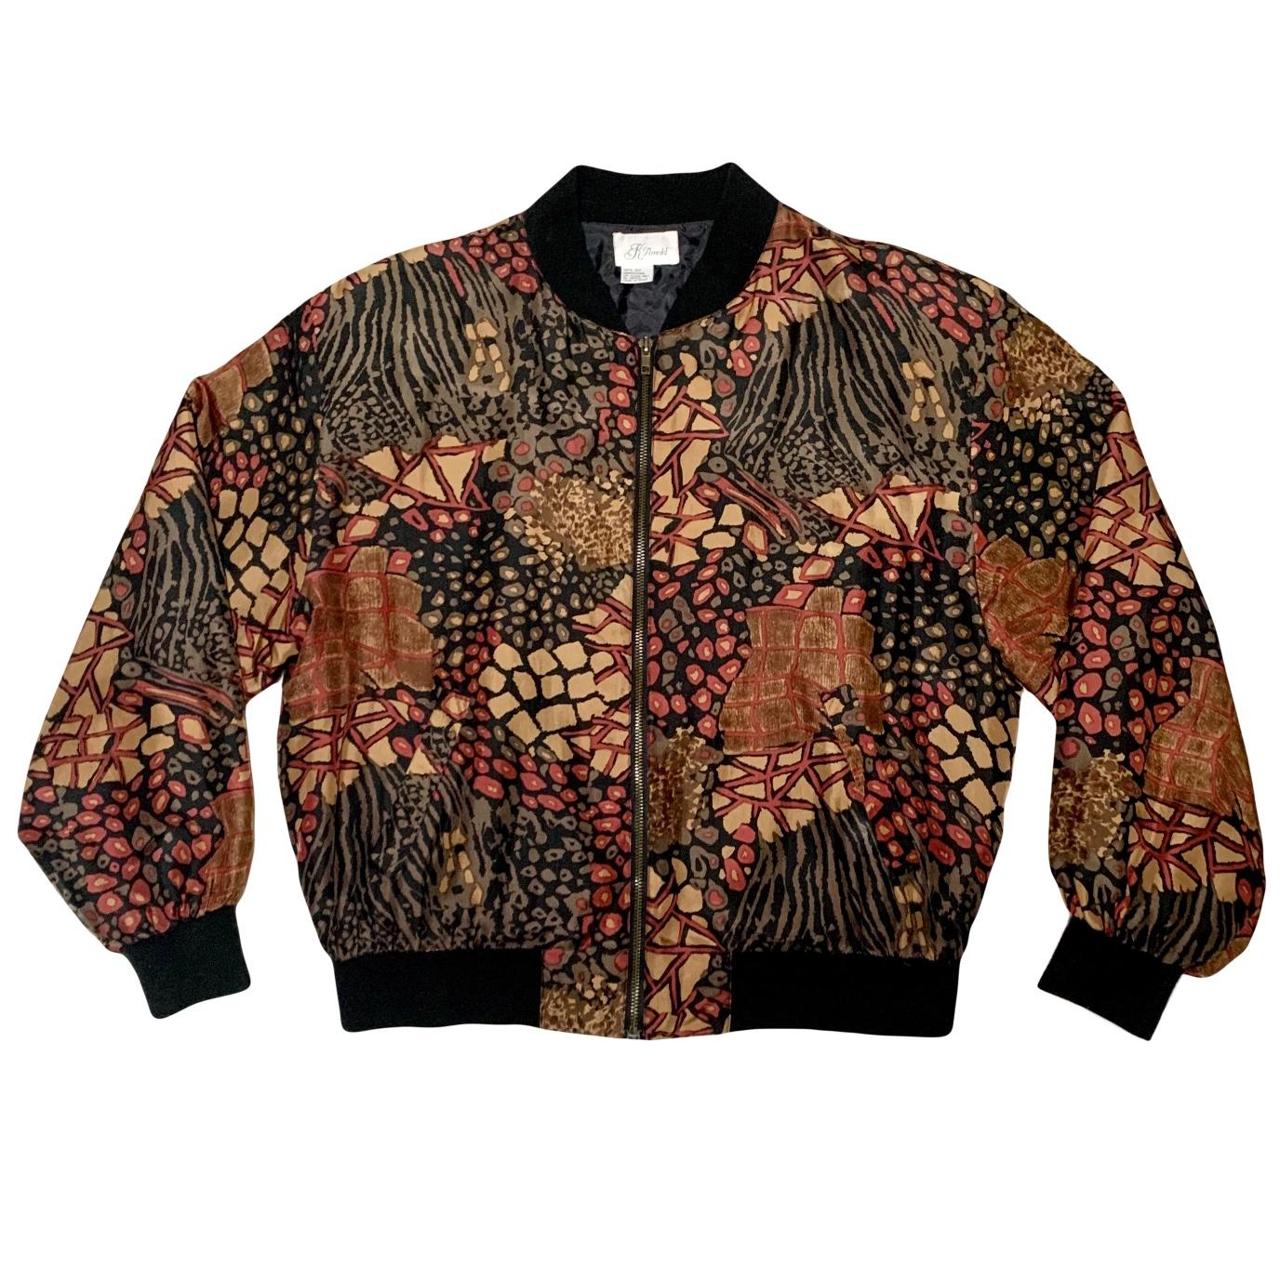 Women's bomber jacket - black with gold zips and leopard print